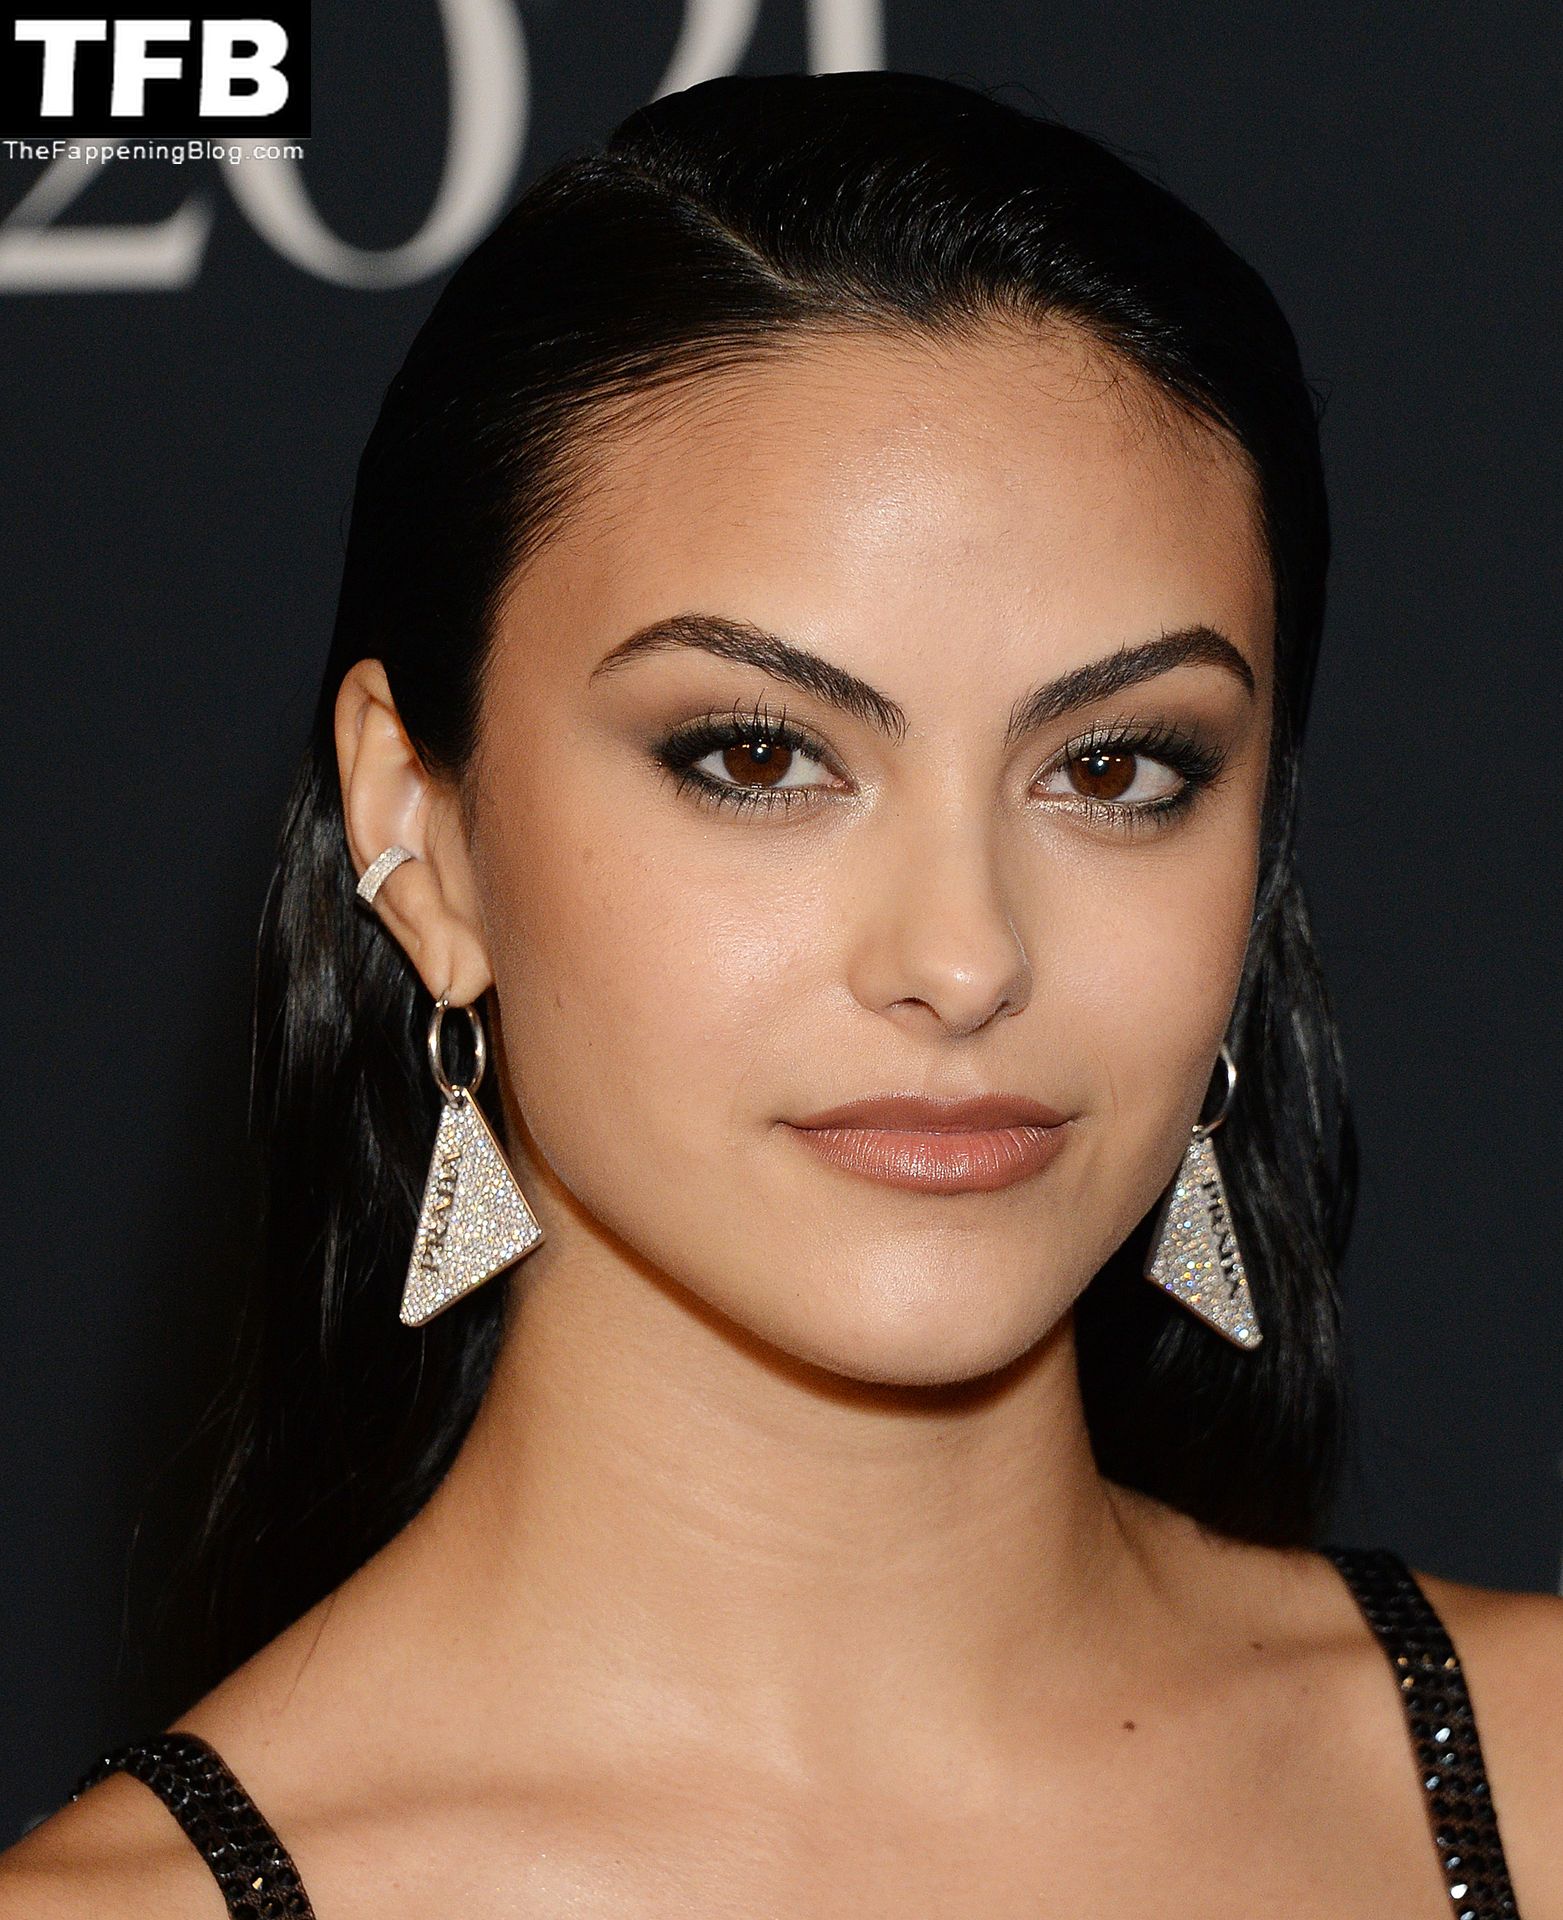 Camila-Mendes-See-Through-Tits-The-Fappening-Blog-58.jpg